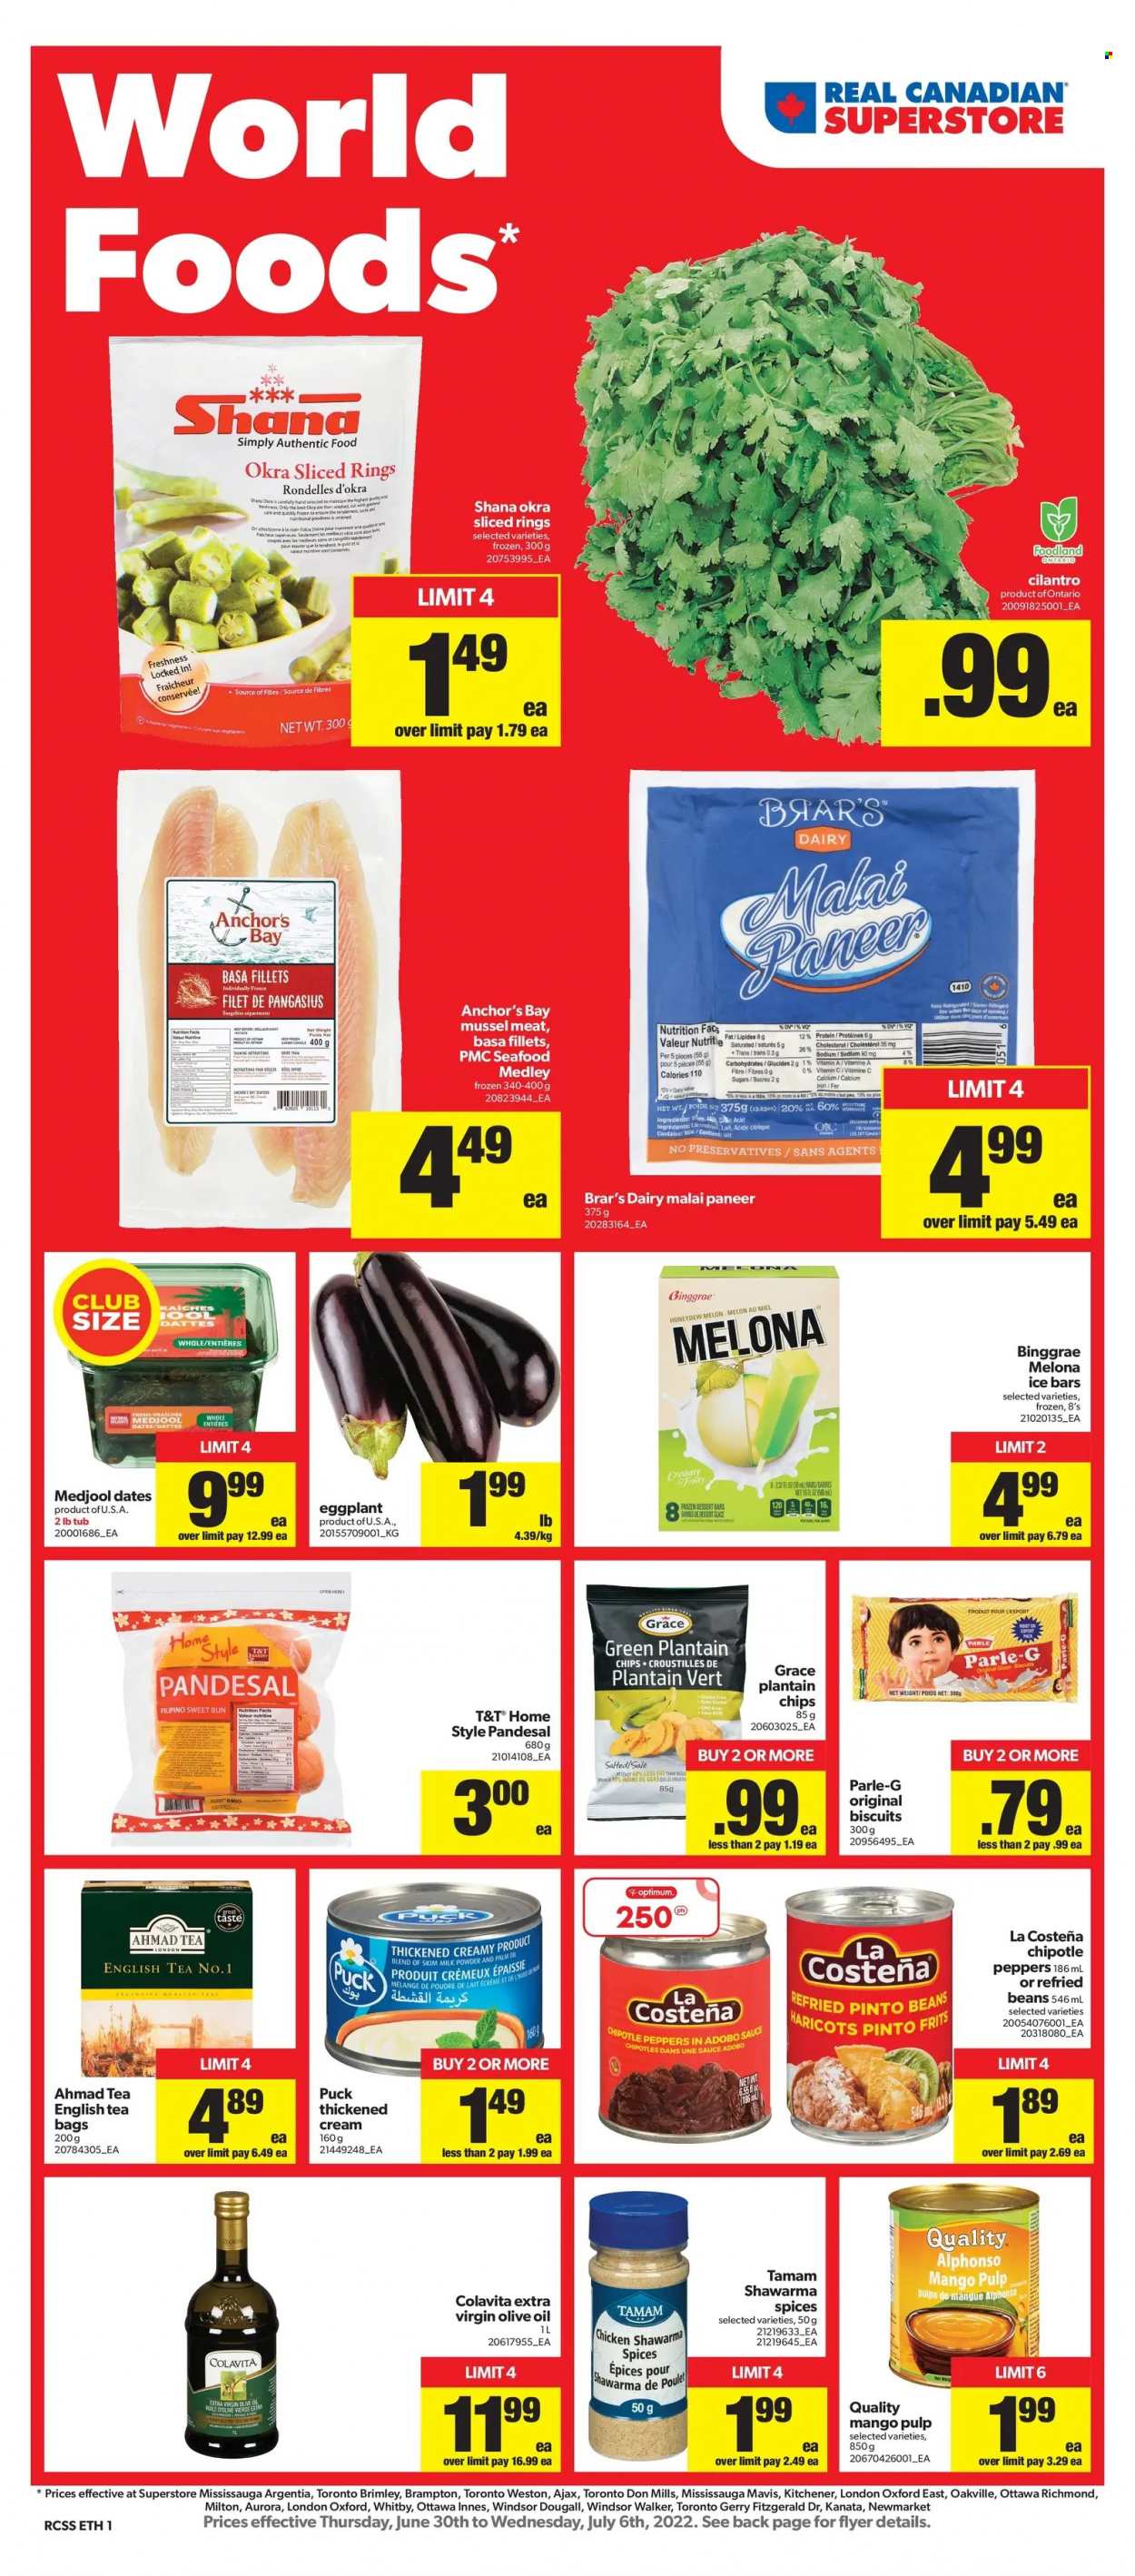 thumbnail - Real Canadian Superstore Flyer - June 30, 2022 - July 06, 2022 - Sales products - okra, honeydew, melons, mussels, pangasius, seafood, paneer, Puck, milk, milk powder, Anchor, biscuit, Parle, refried beans, pinto beans, cilantro, adobo sauce, extra virgin olive oil, palm oil, olive oil, oil, dried dates, tea bags, Ajax, Optimum, iron, vitamin c, calcium. Page 2.